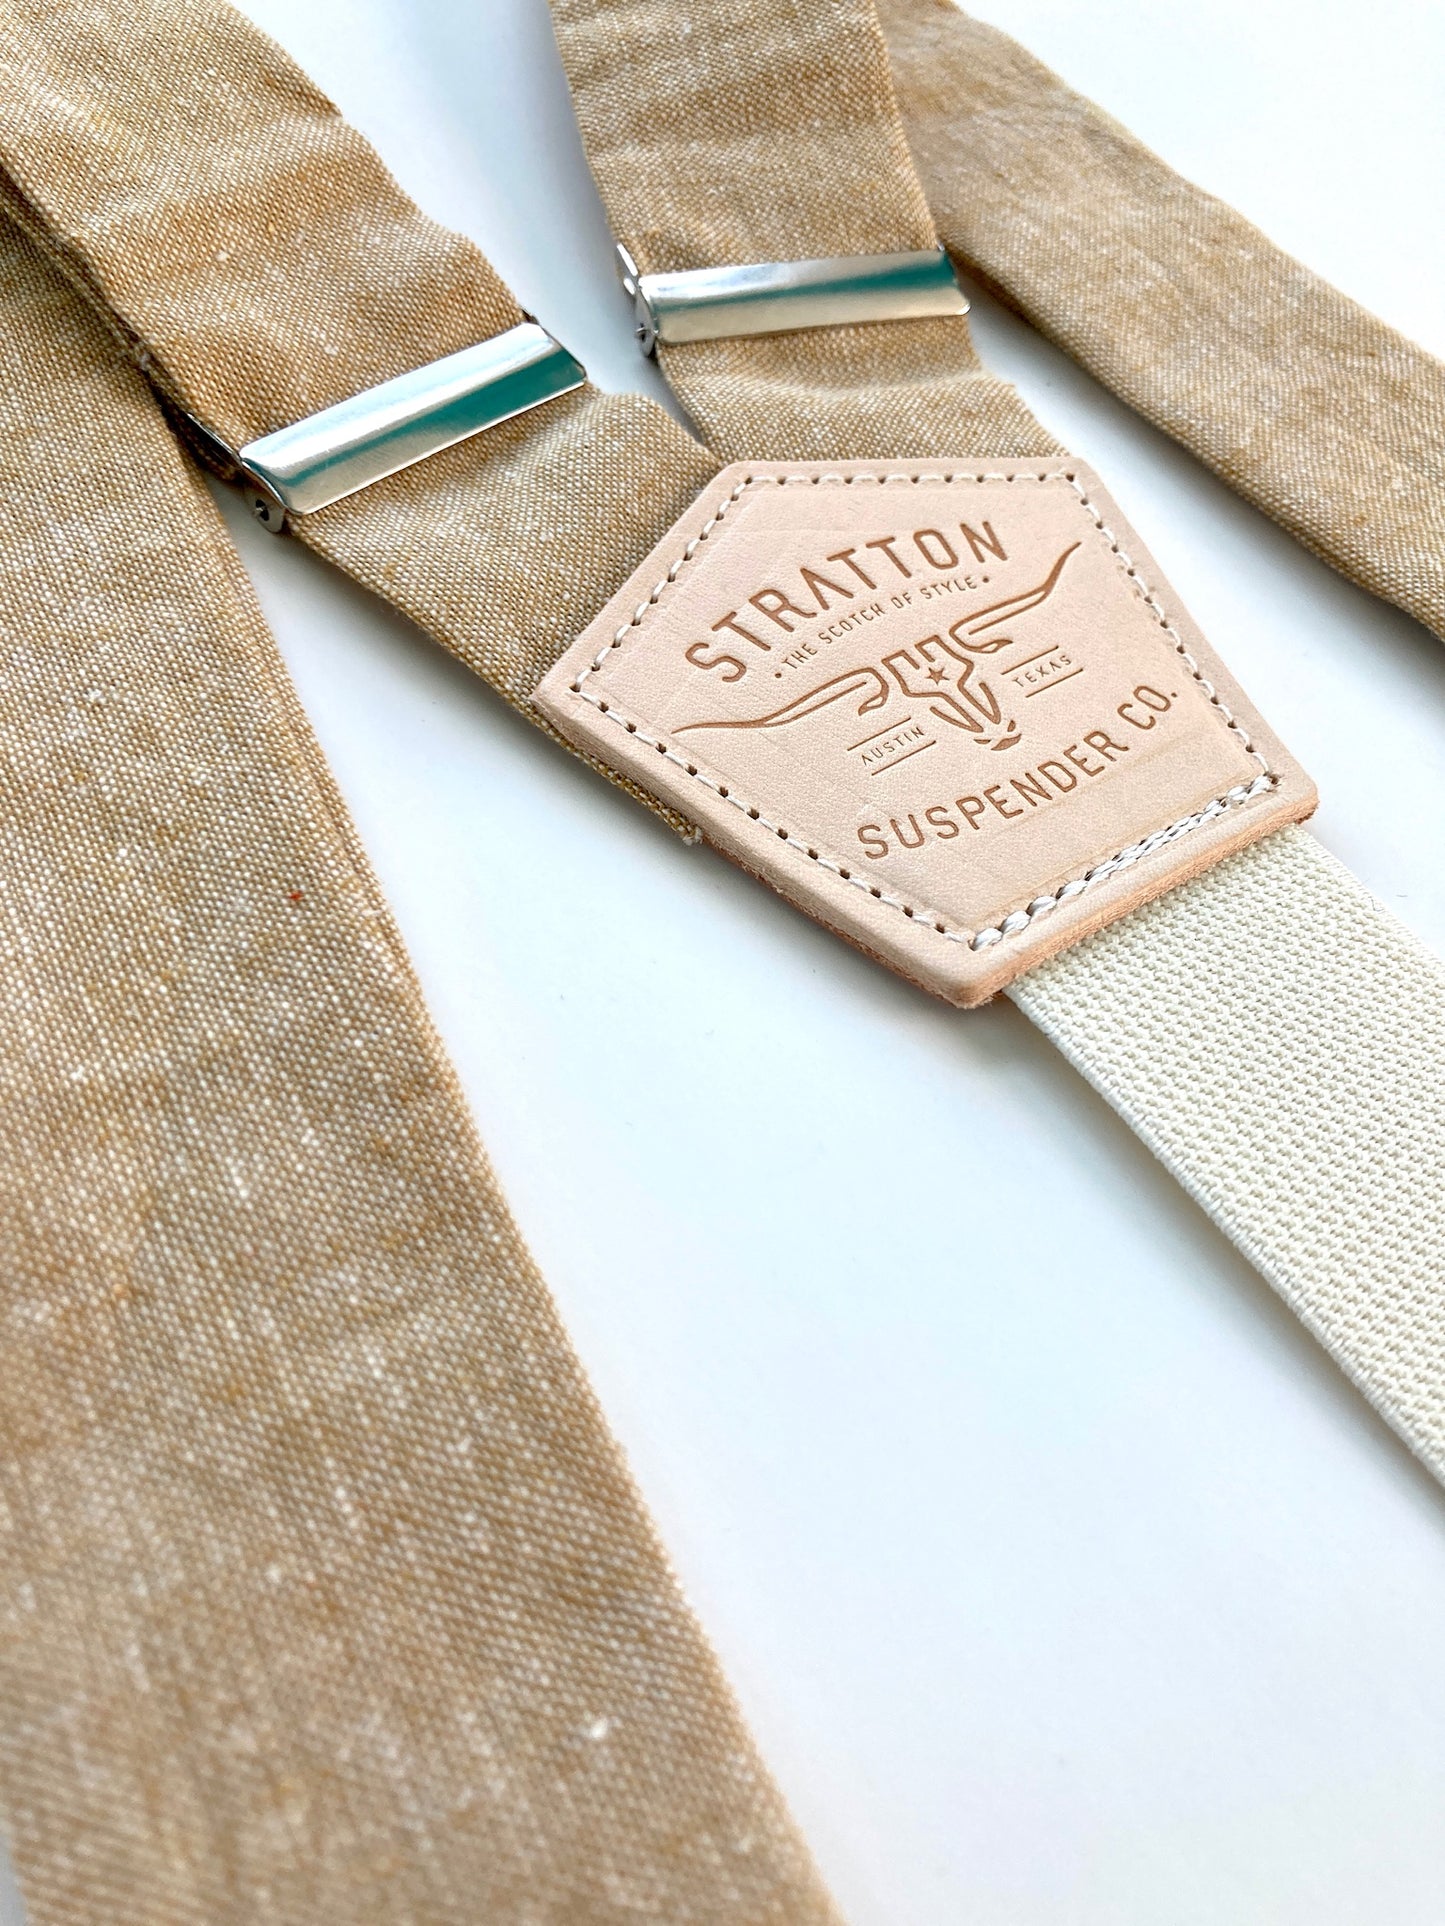 Leather Linen Button On Suspenders Set - Spring Collection Stratton Suspender Co.